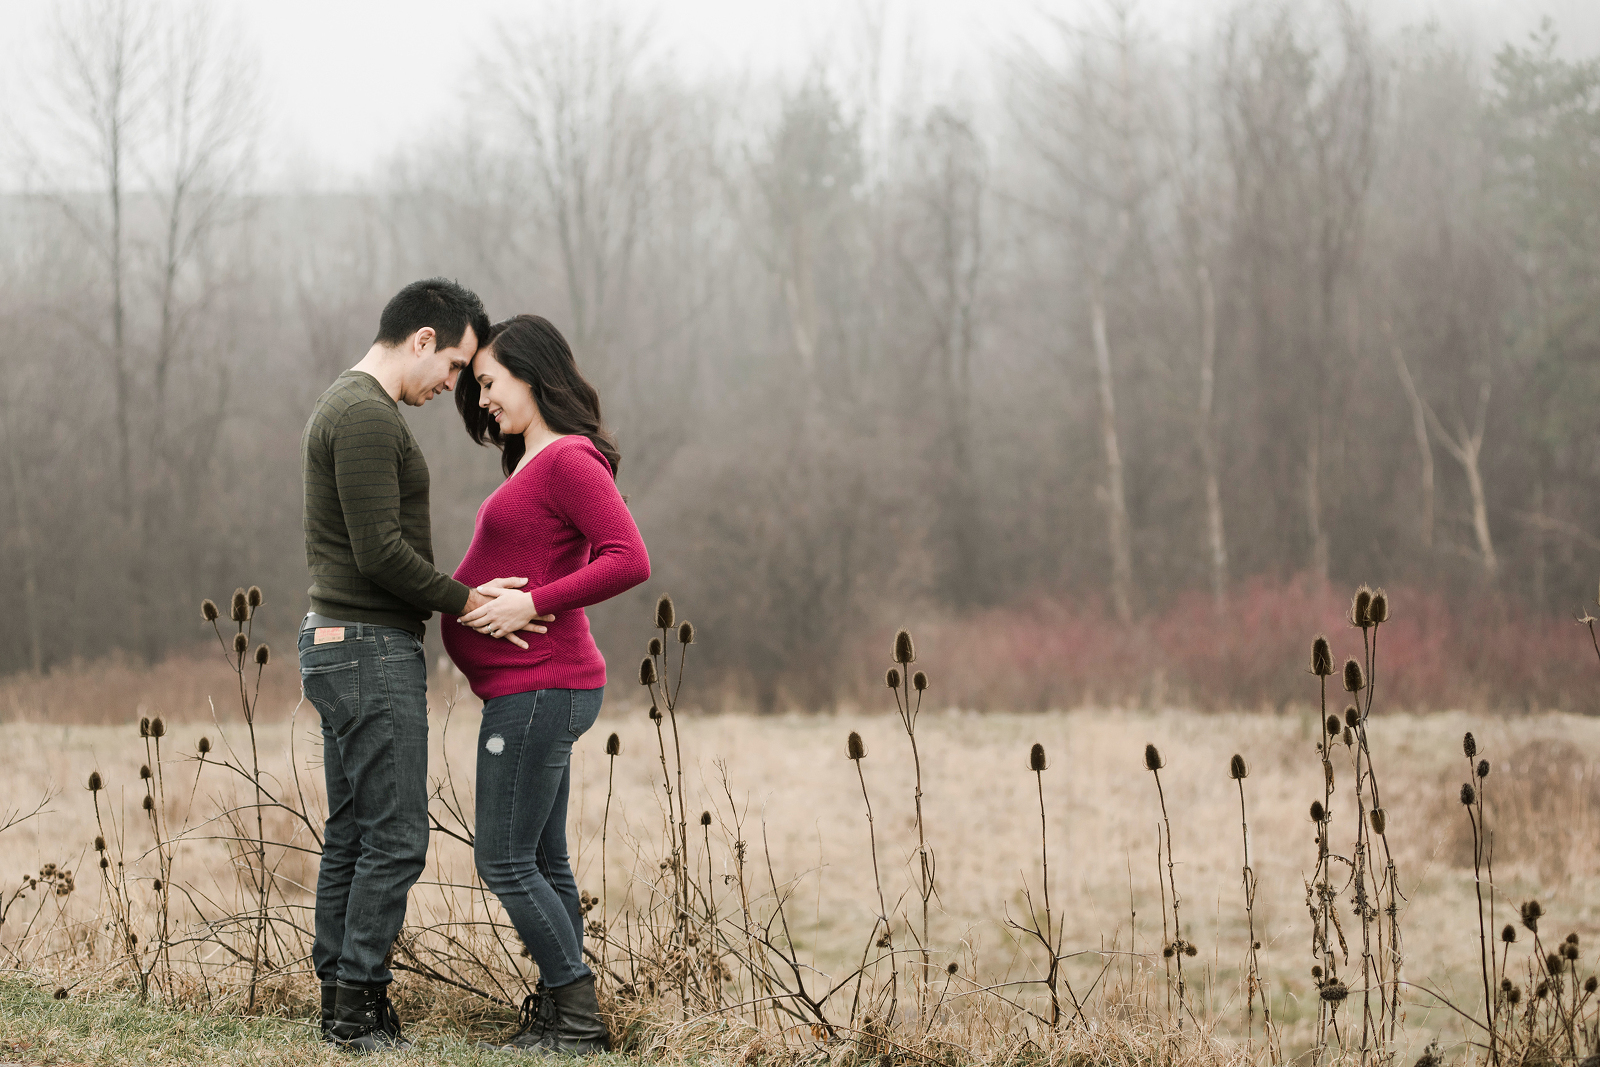 Maternity portrait of a couple in a foggy field.